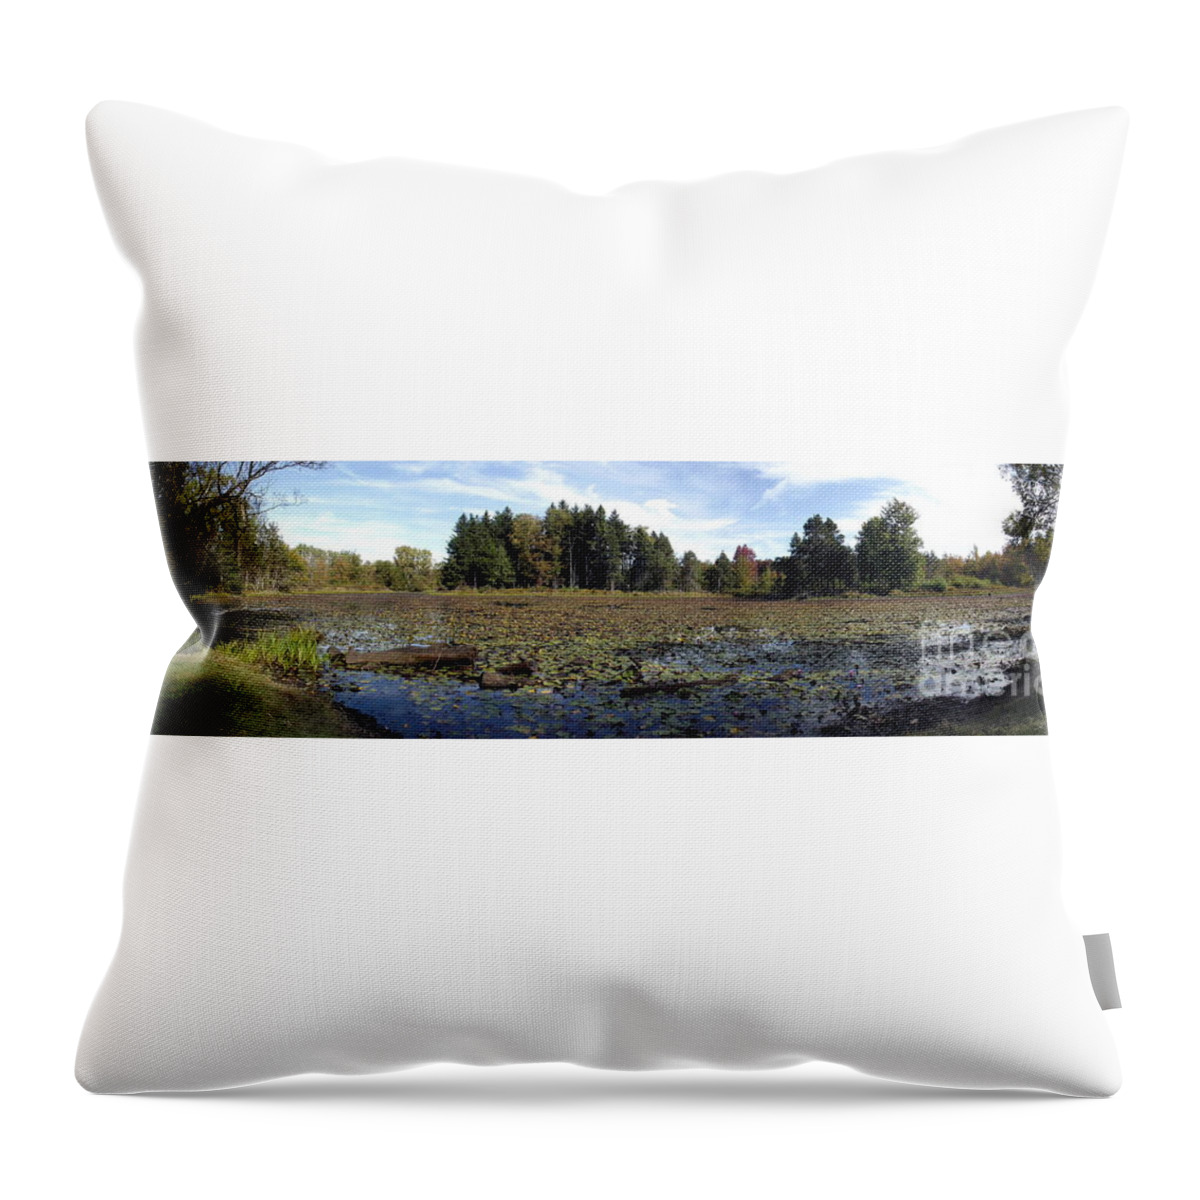 Panorama Throw Pillow featuring the photograph Panorama Of a Lake At Reinstein Woods Nature Preserve In New York State by Rose Santuci-Sofranko